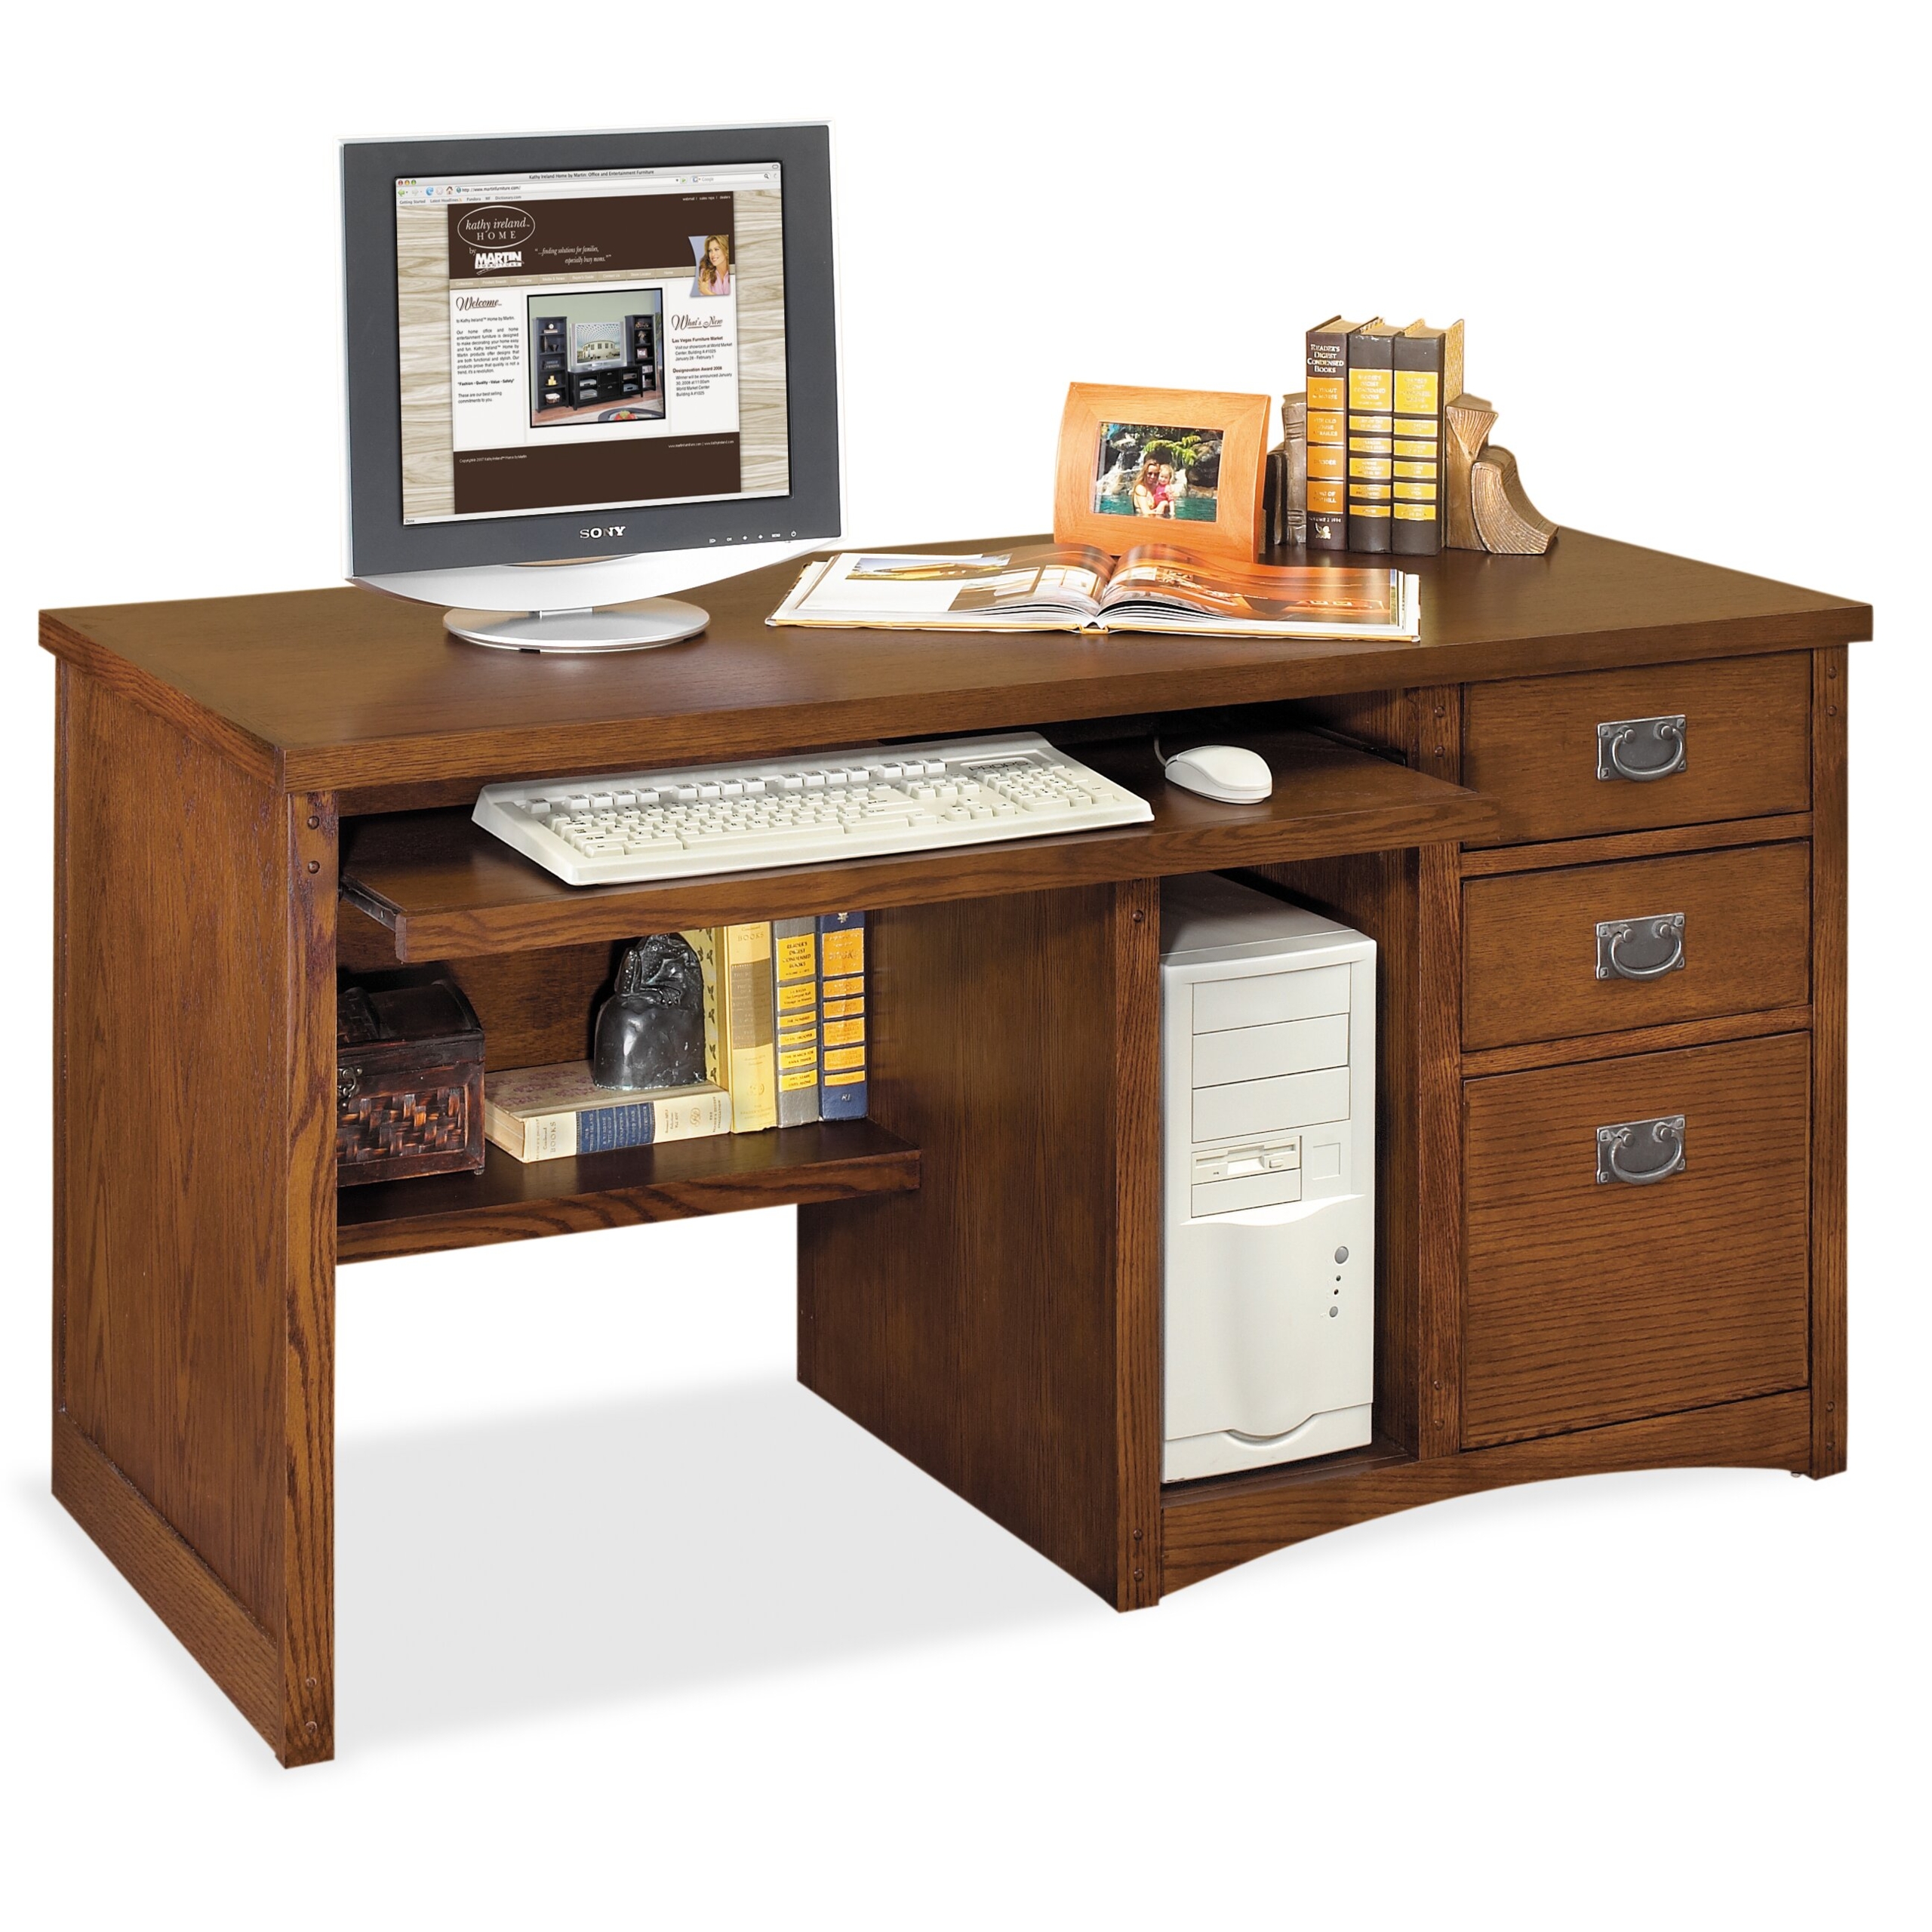 Mission home office furniture 26